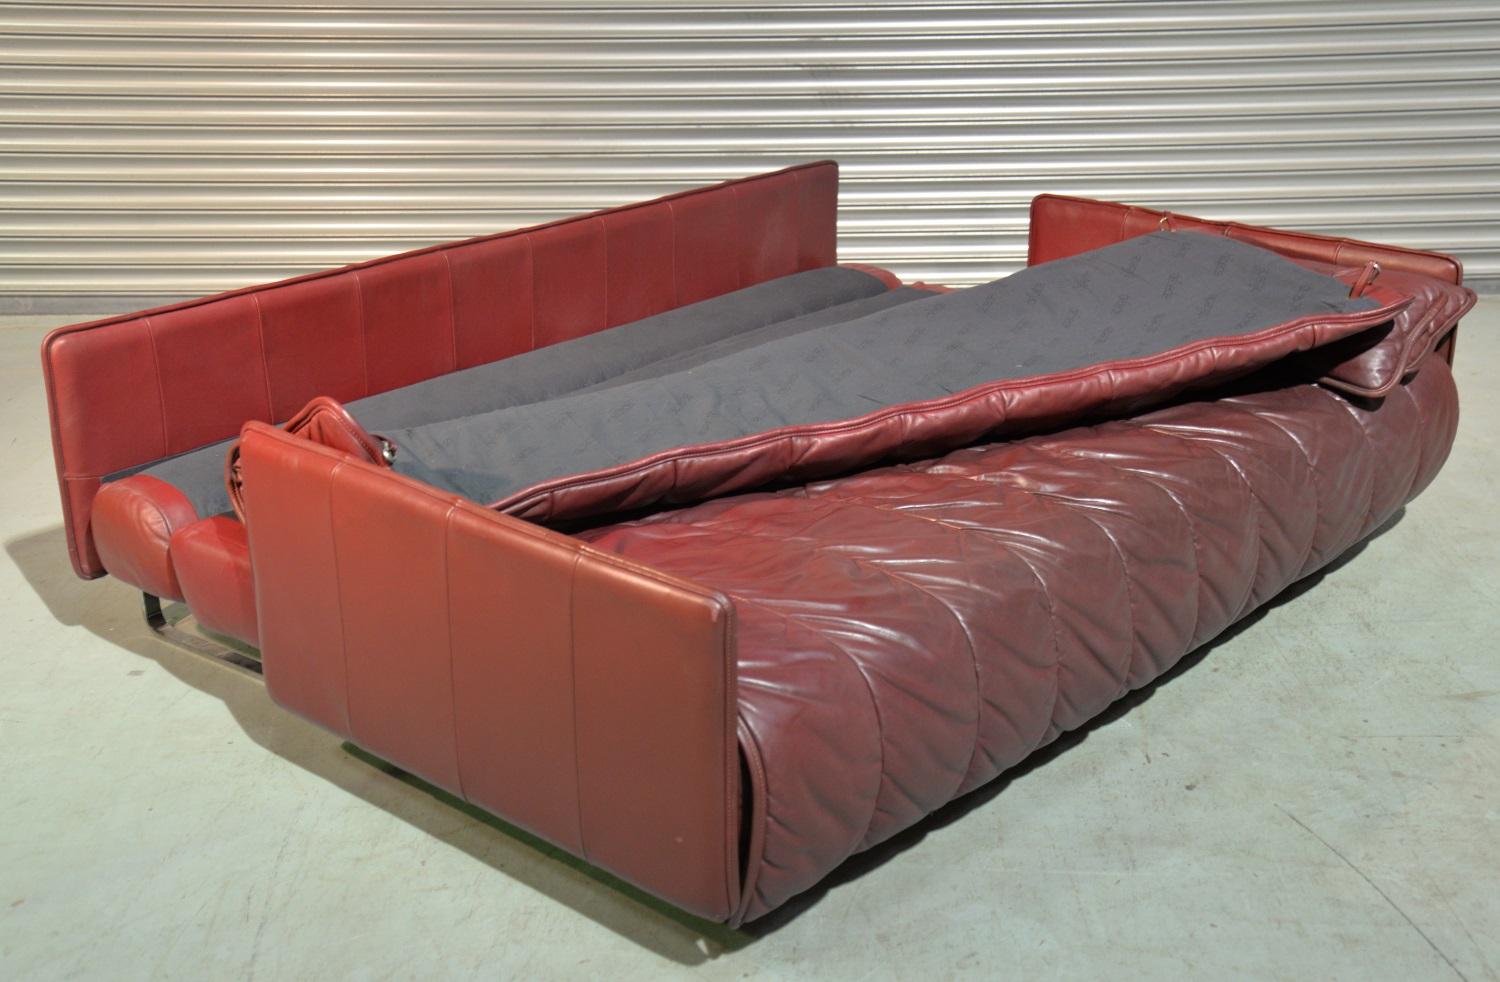 Vintage De Sede Patchwork Leather Sofa or Daybed, Switzerland, 1970s For Sale 11